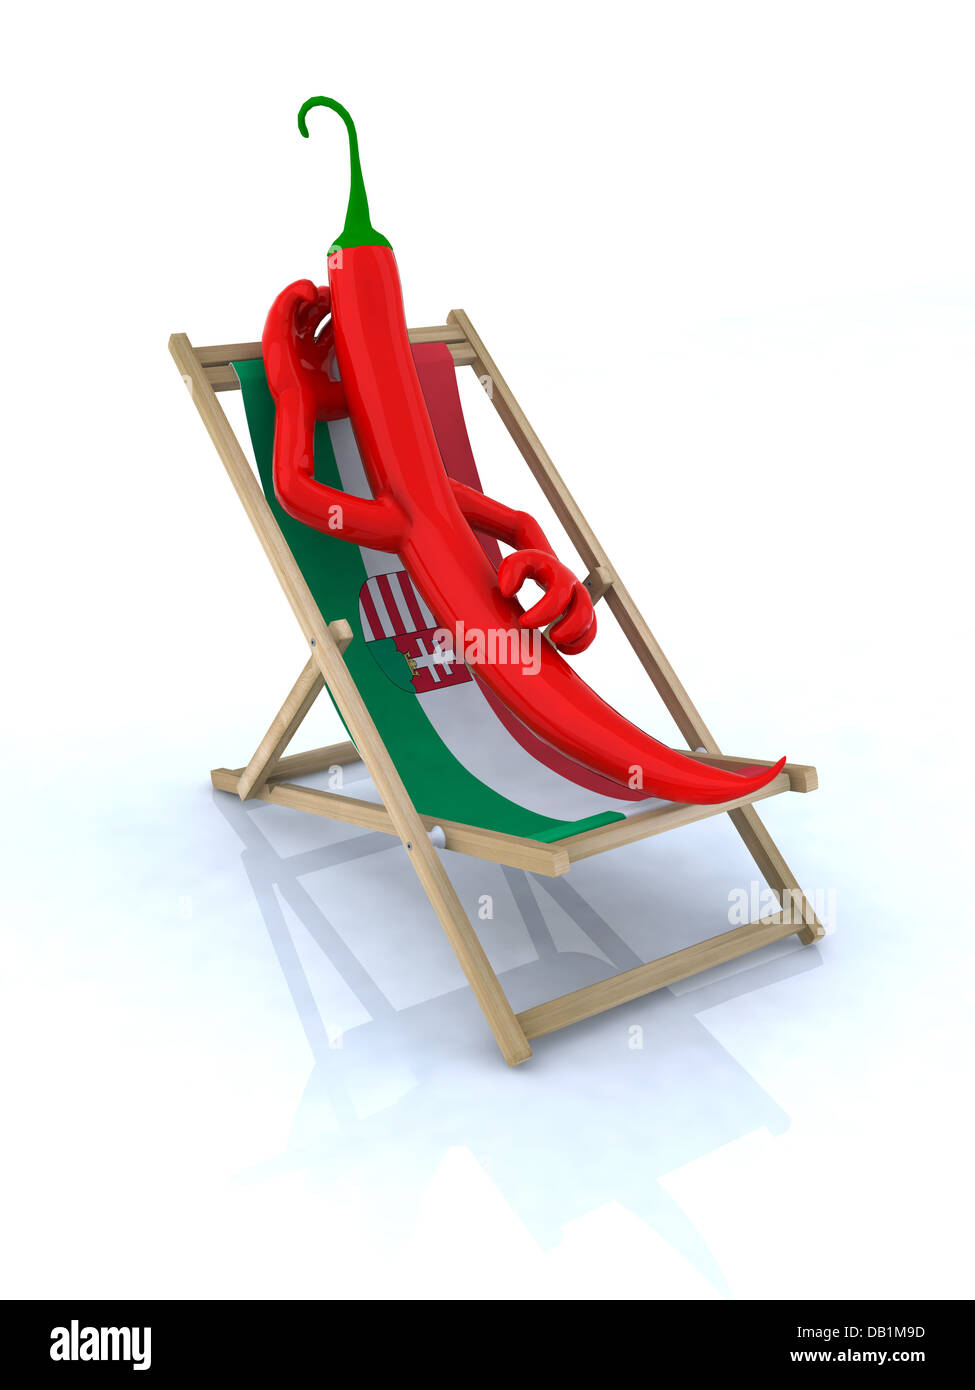 paprika resting on a beach chair, concept hungarian ingredient, 3d illustration Stock Photo